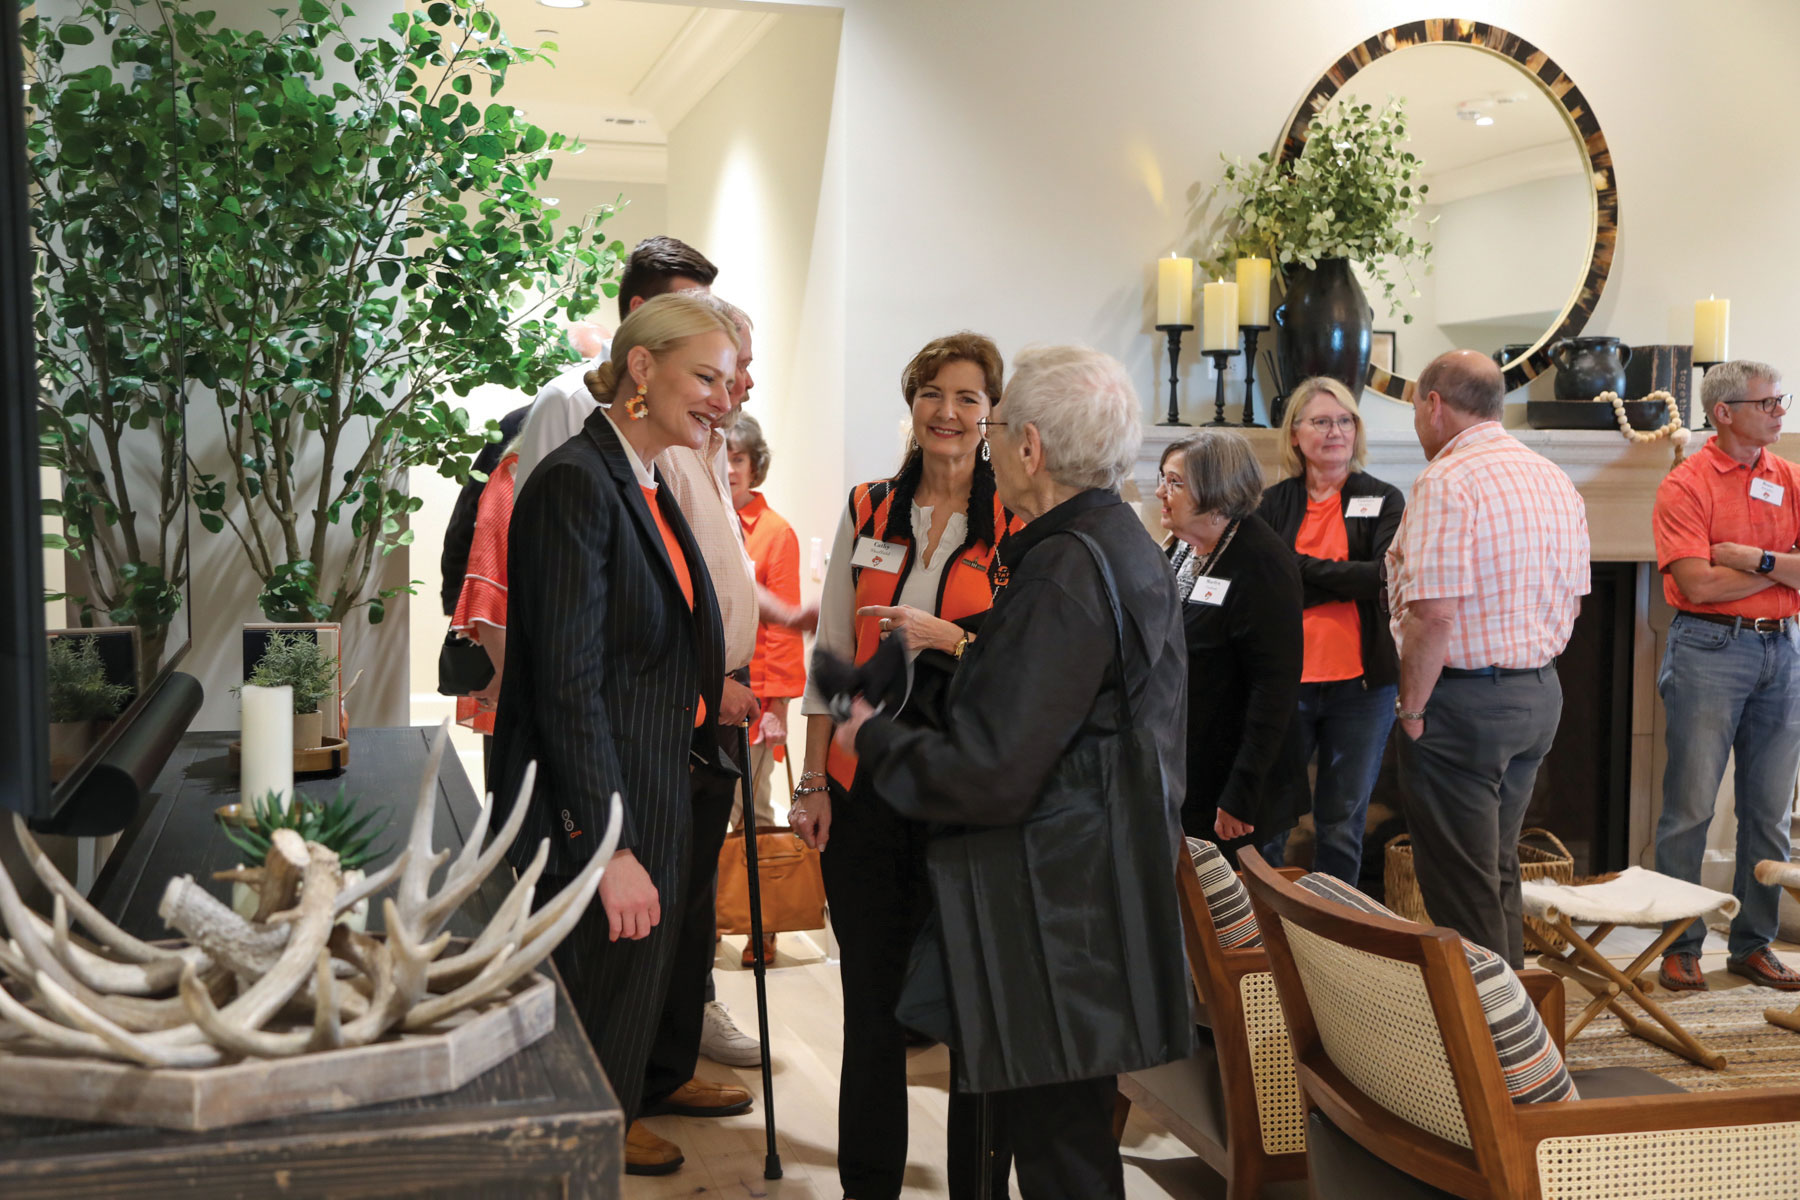 President Shrum spends time chatting with donors during their walkthrough of the University House.